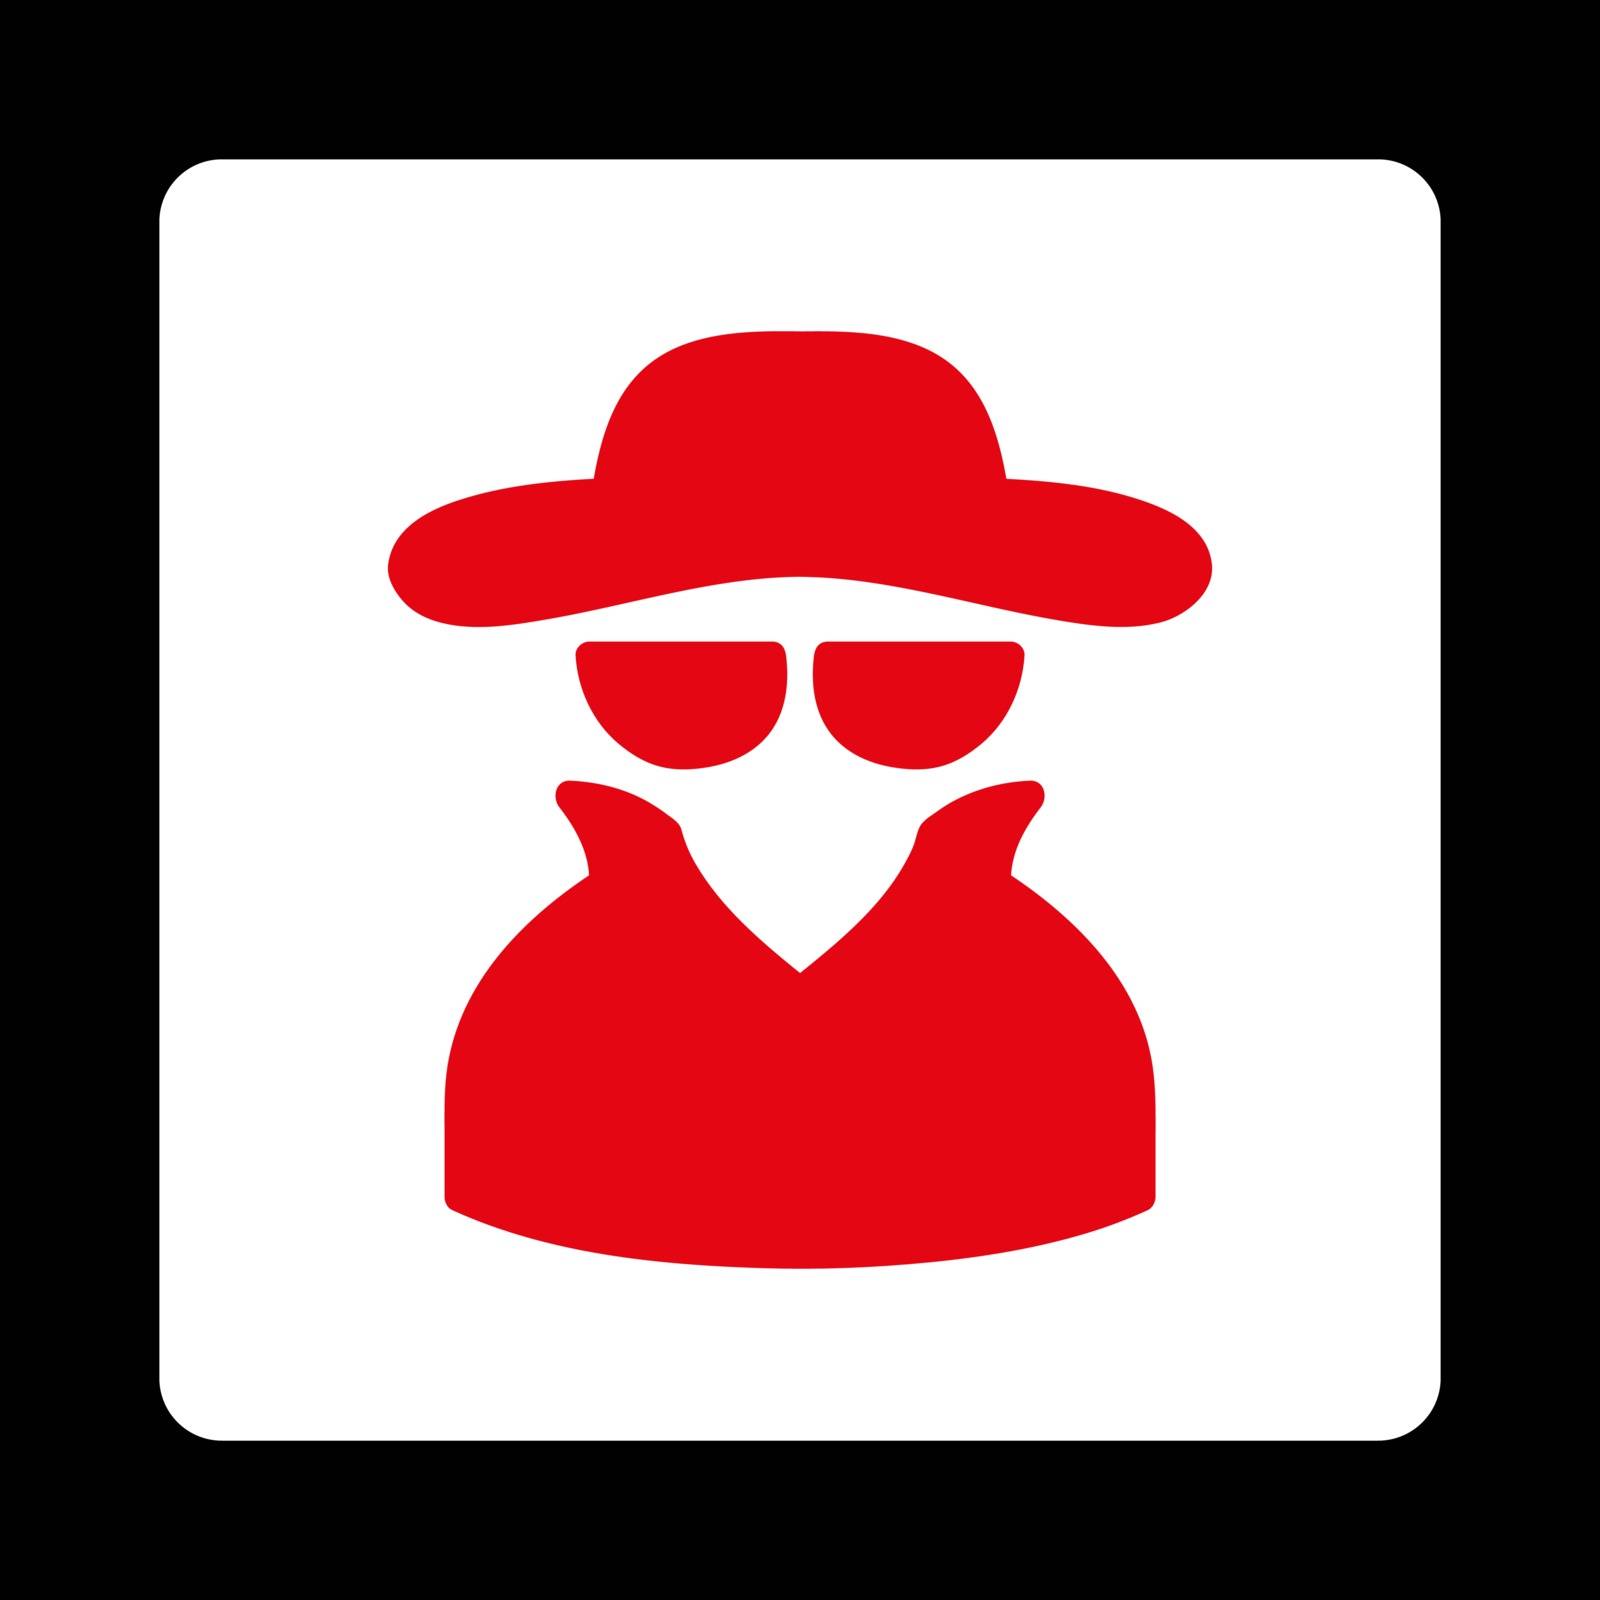 Spy icon. Vector style is red and white colors, flat rounded square button on a black background.